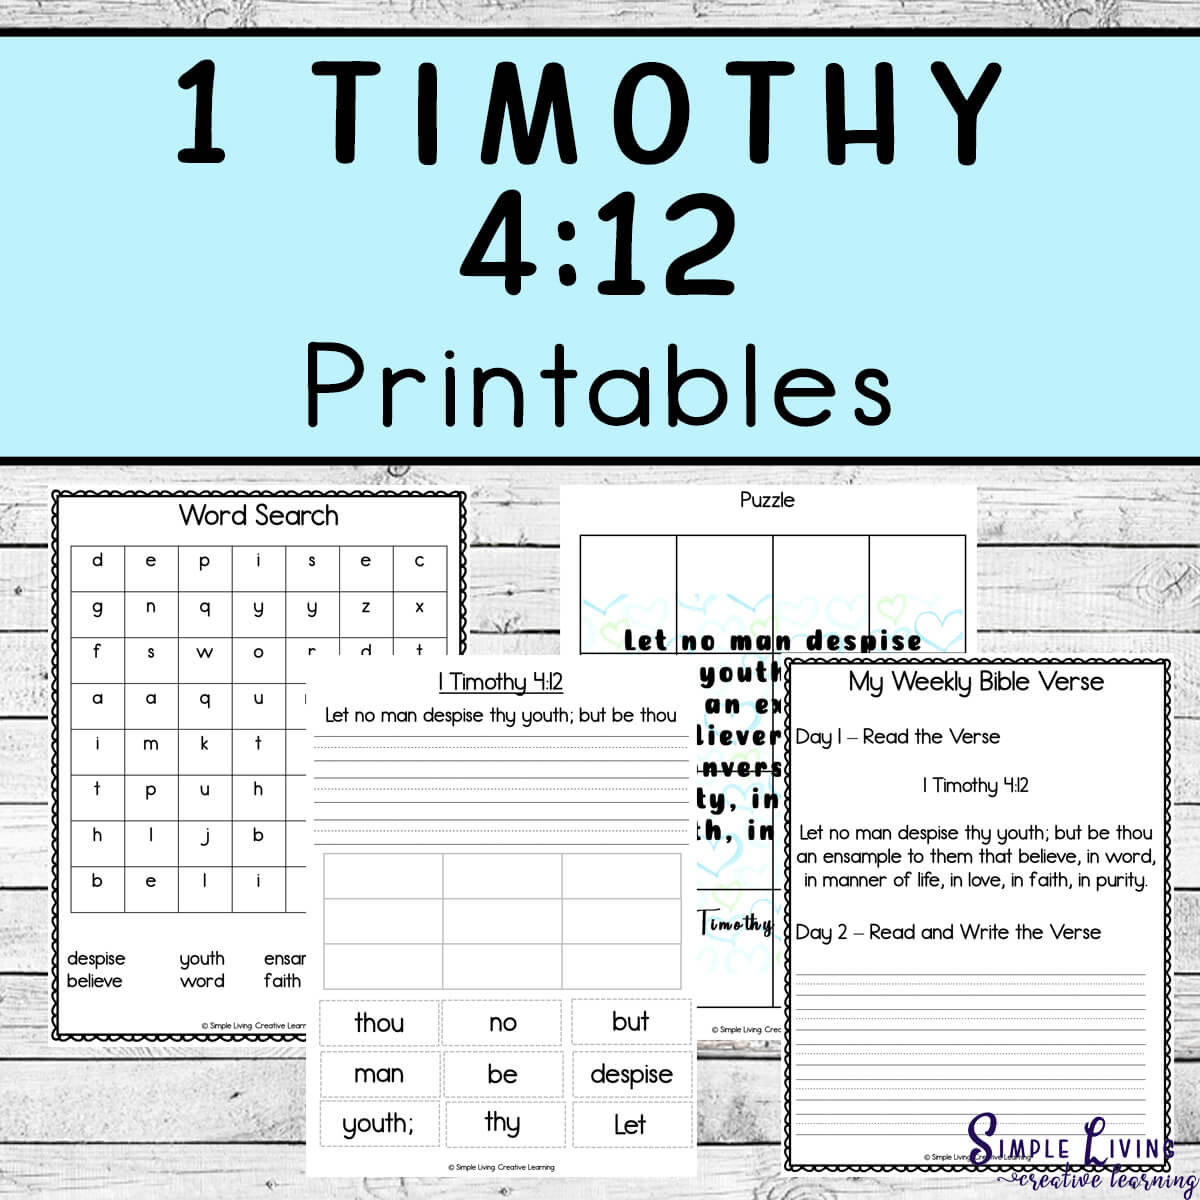 1 Timothy 4:12 Printables four pages